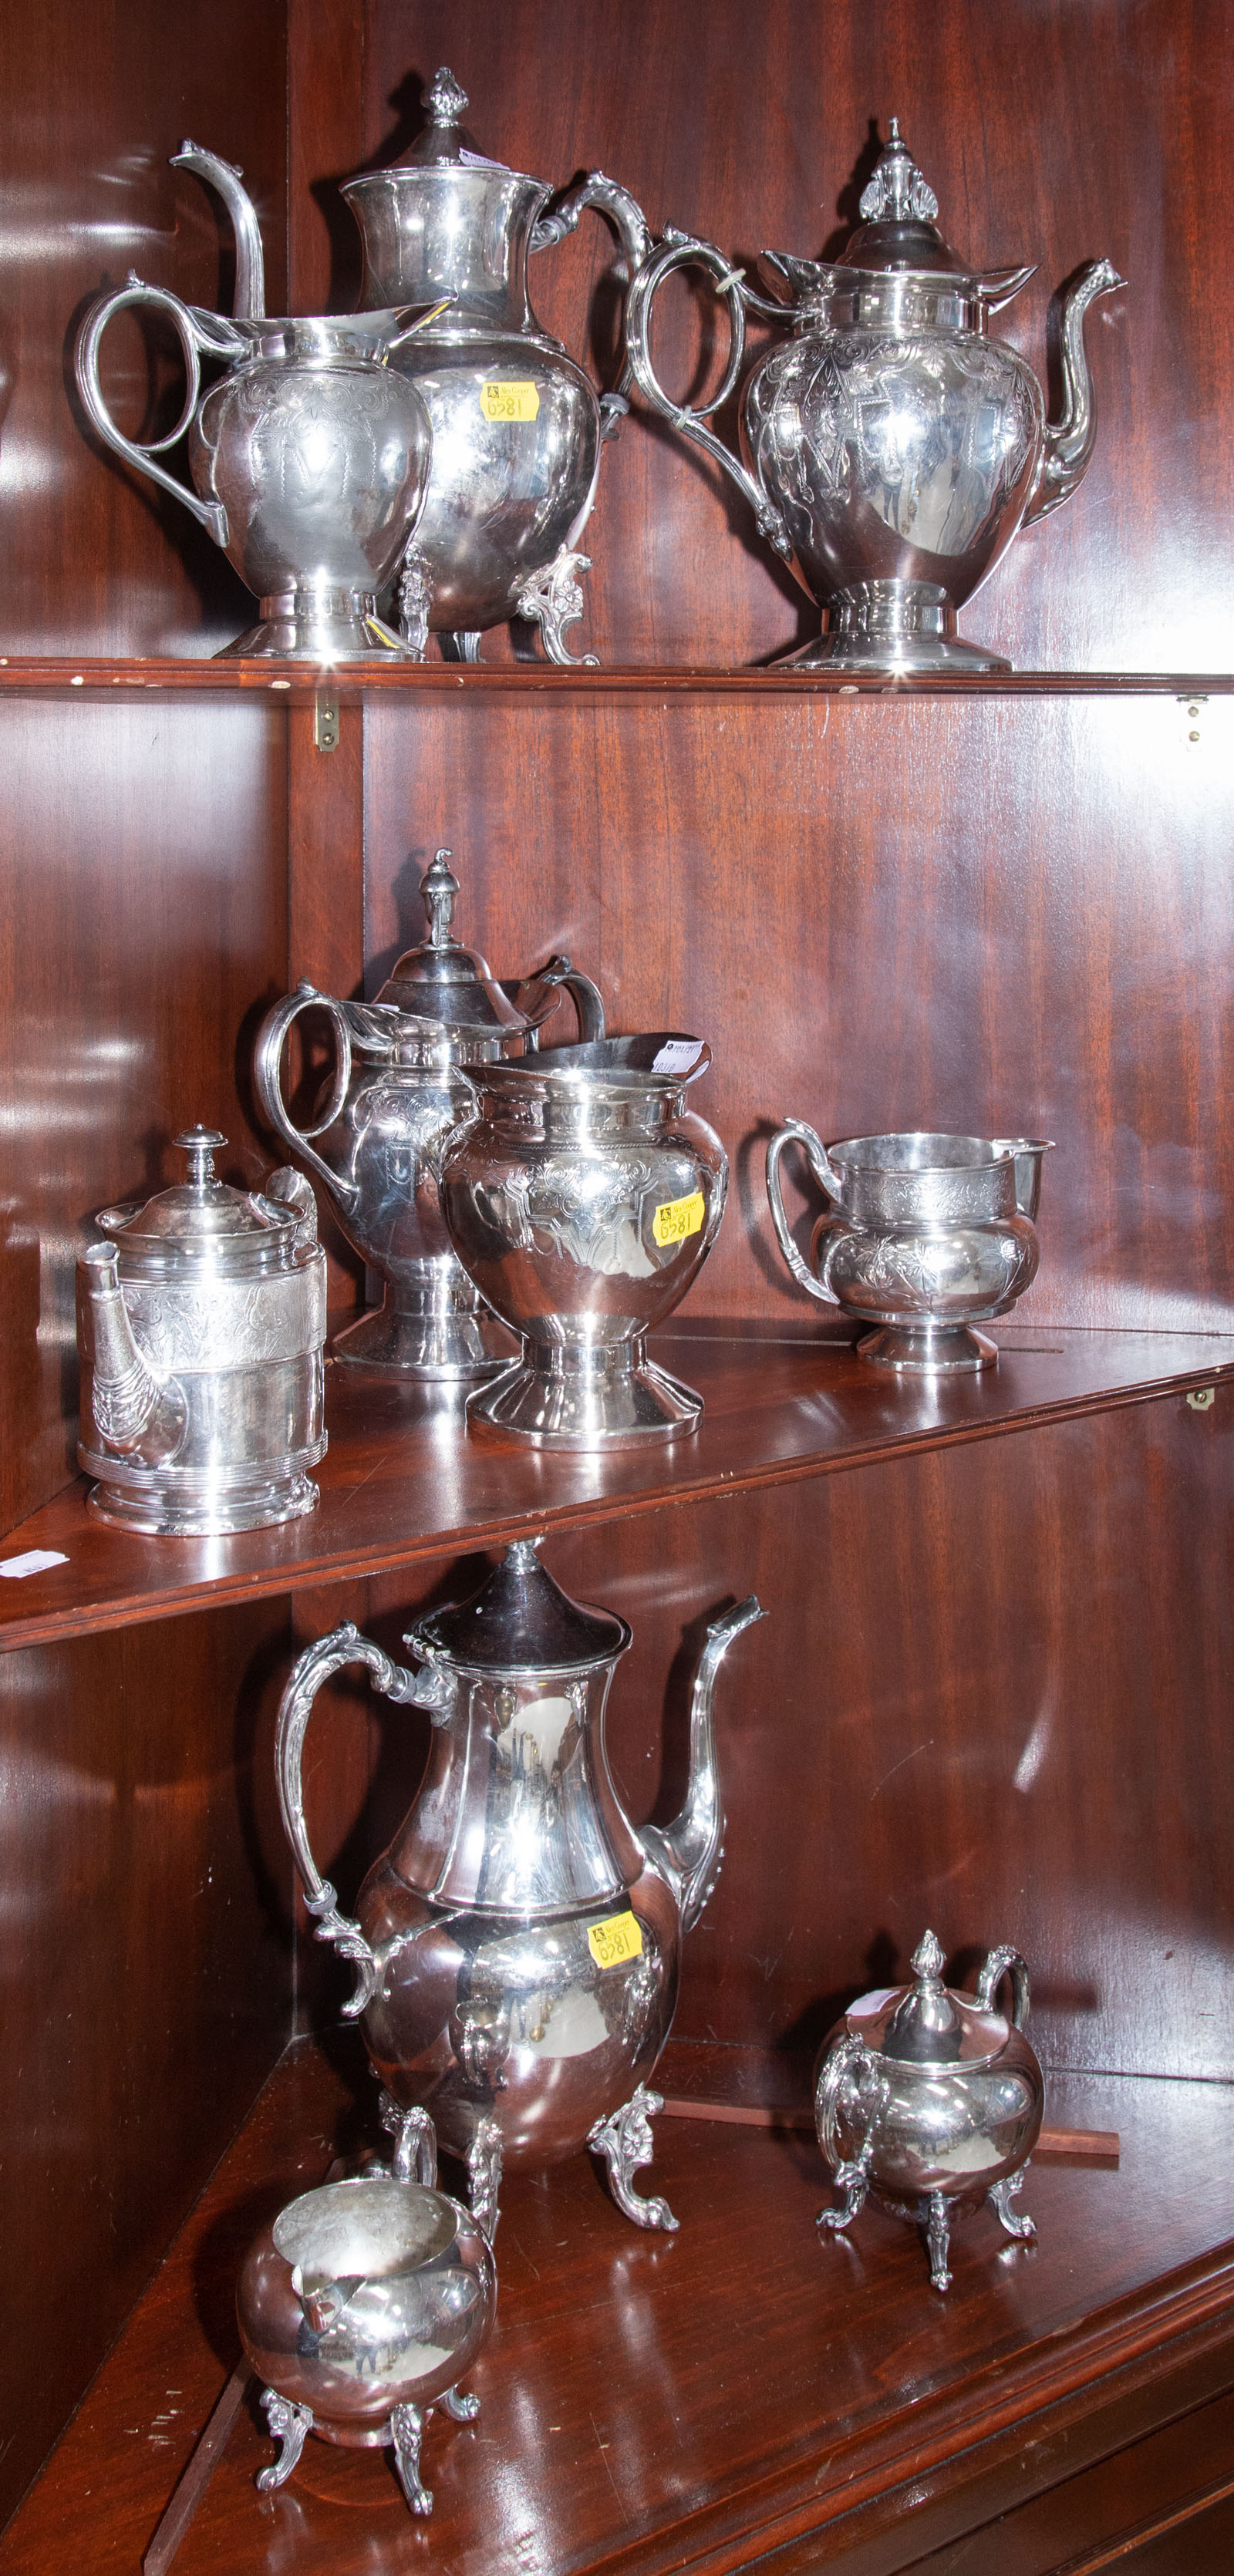 ASSORTED SILVER PLATED TEAWARE 310679